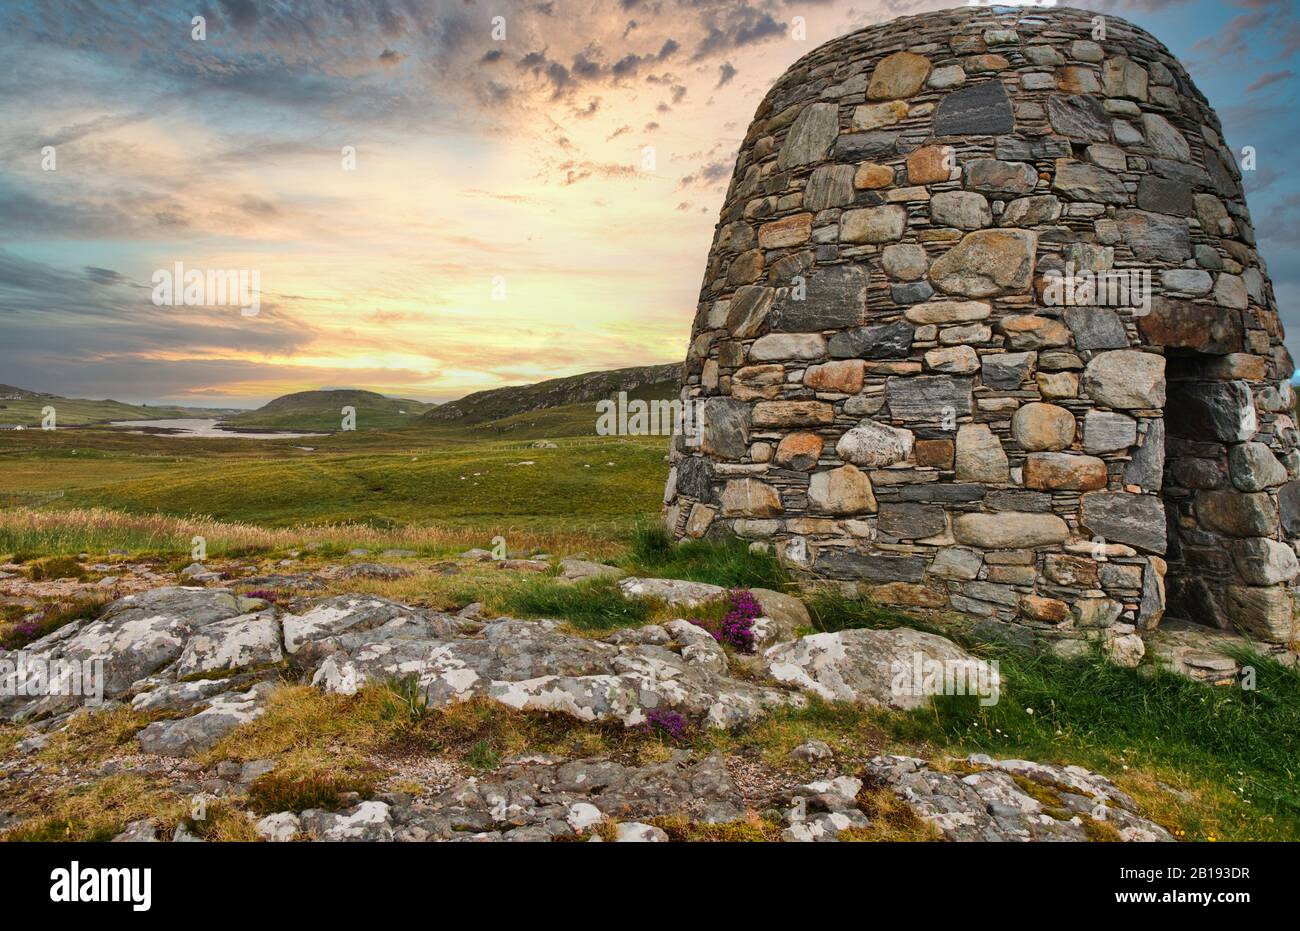 Pairc Deer Raiders Memorial, a stone cairn set in a stunning and remote landscape on the Outer Hebridean island of Lewis, Scotland Stock Photo